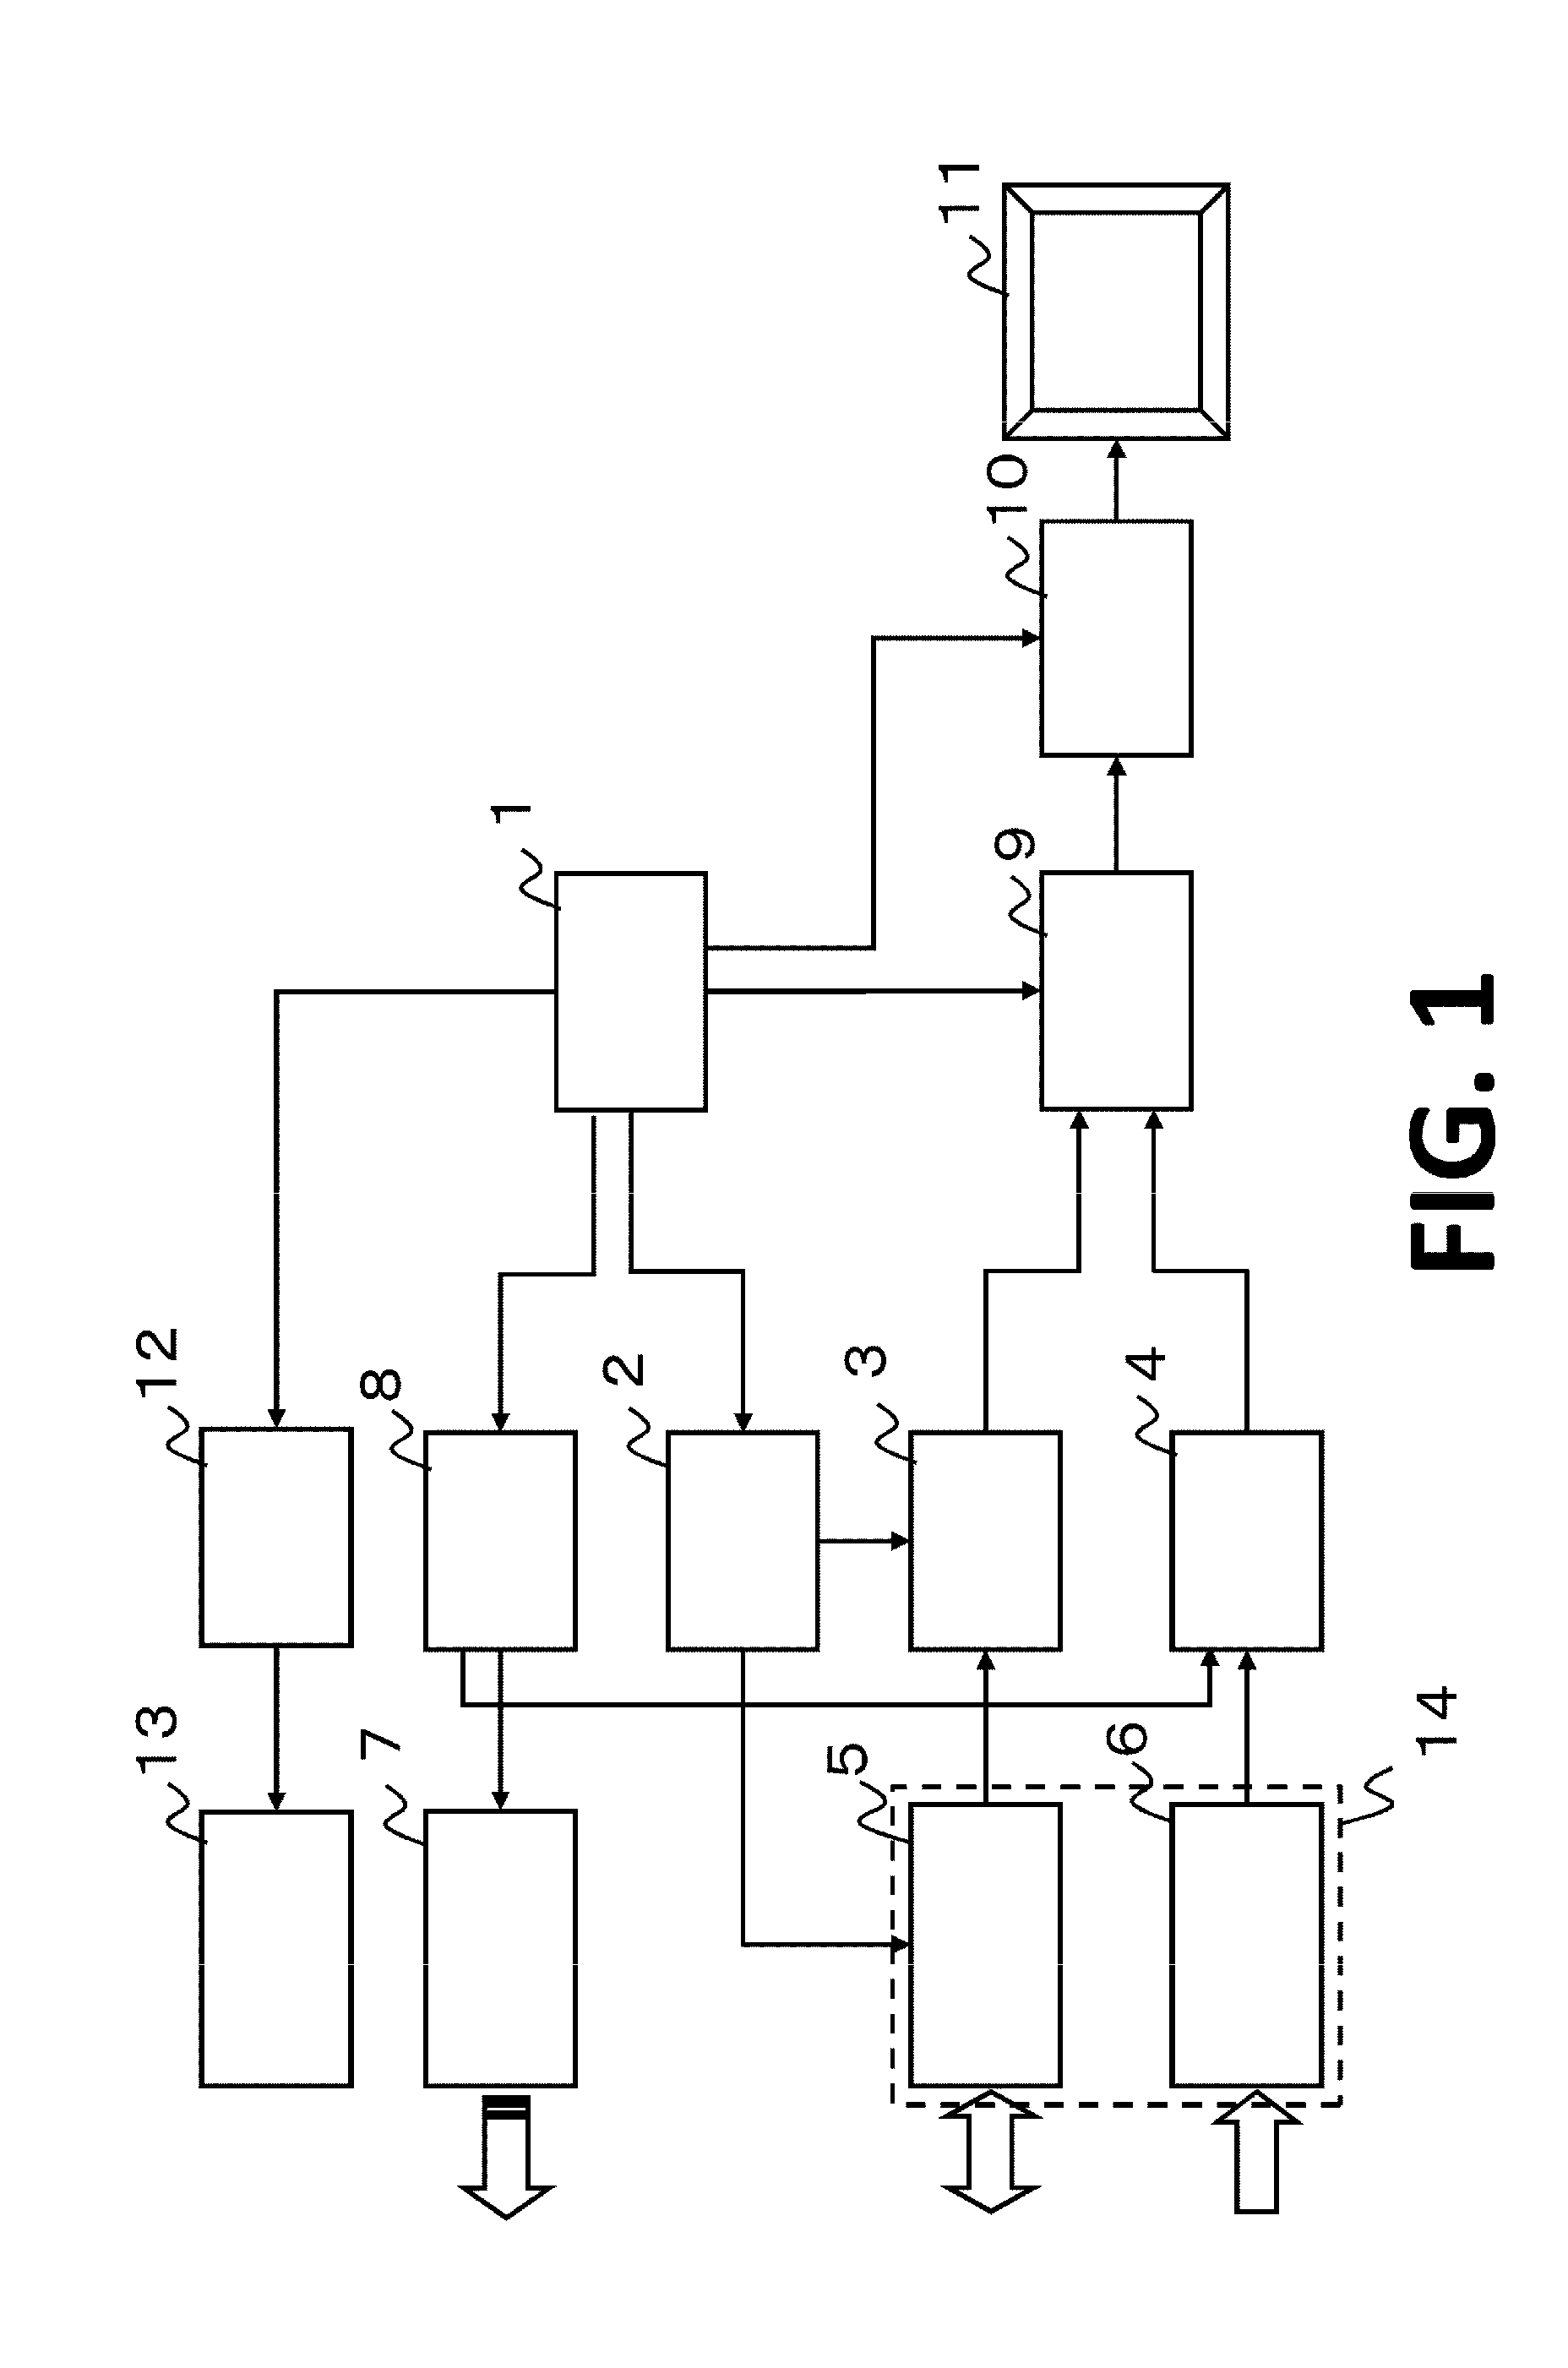 Object information acquiring apparatus and method for controlling same